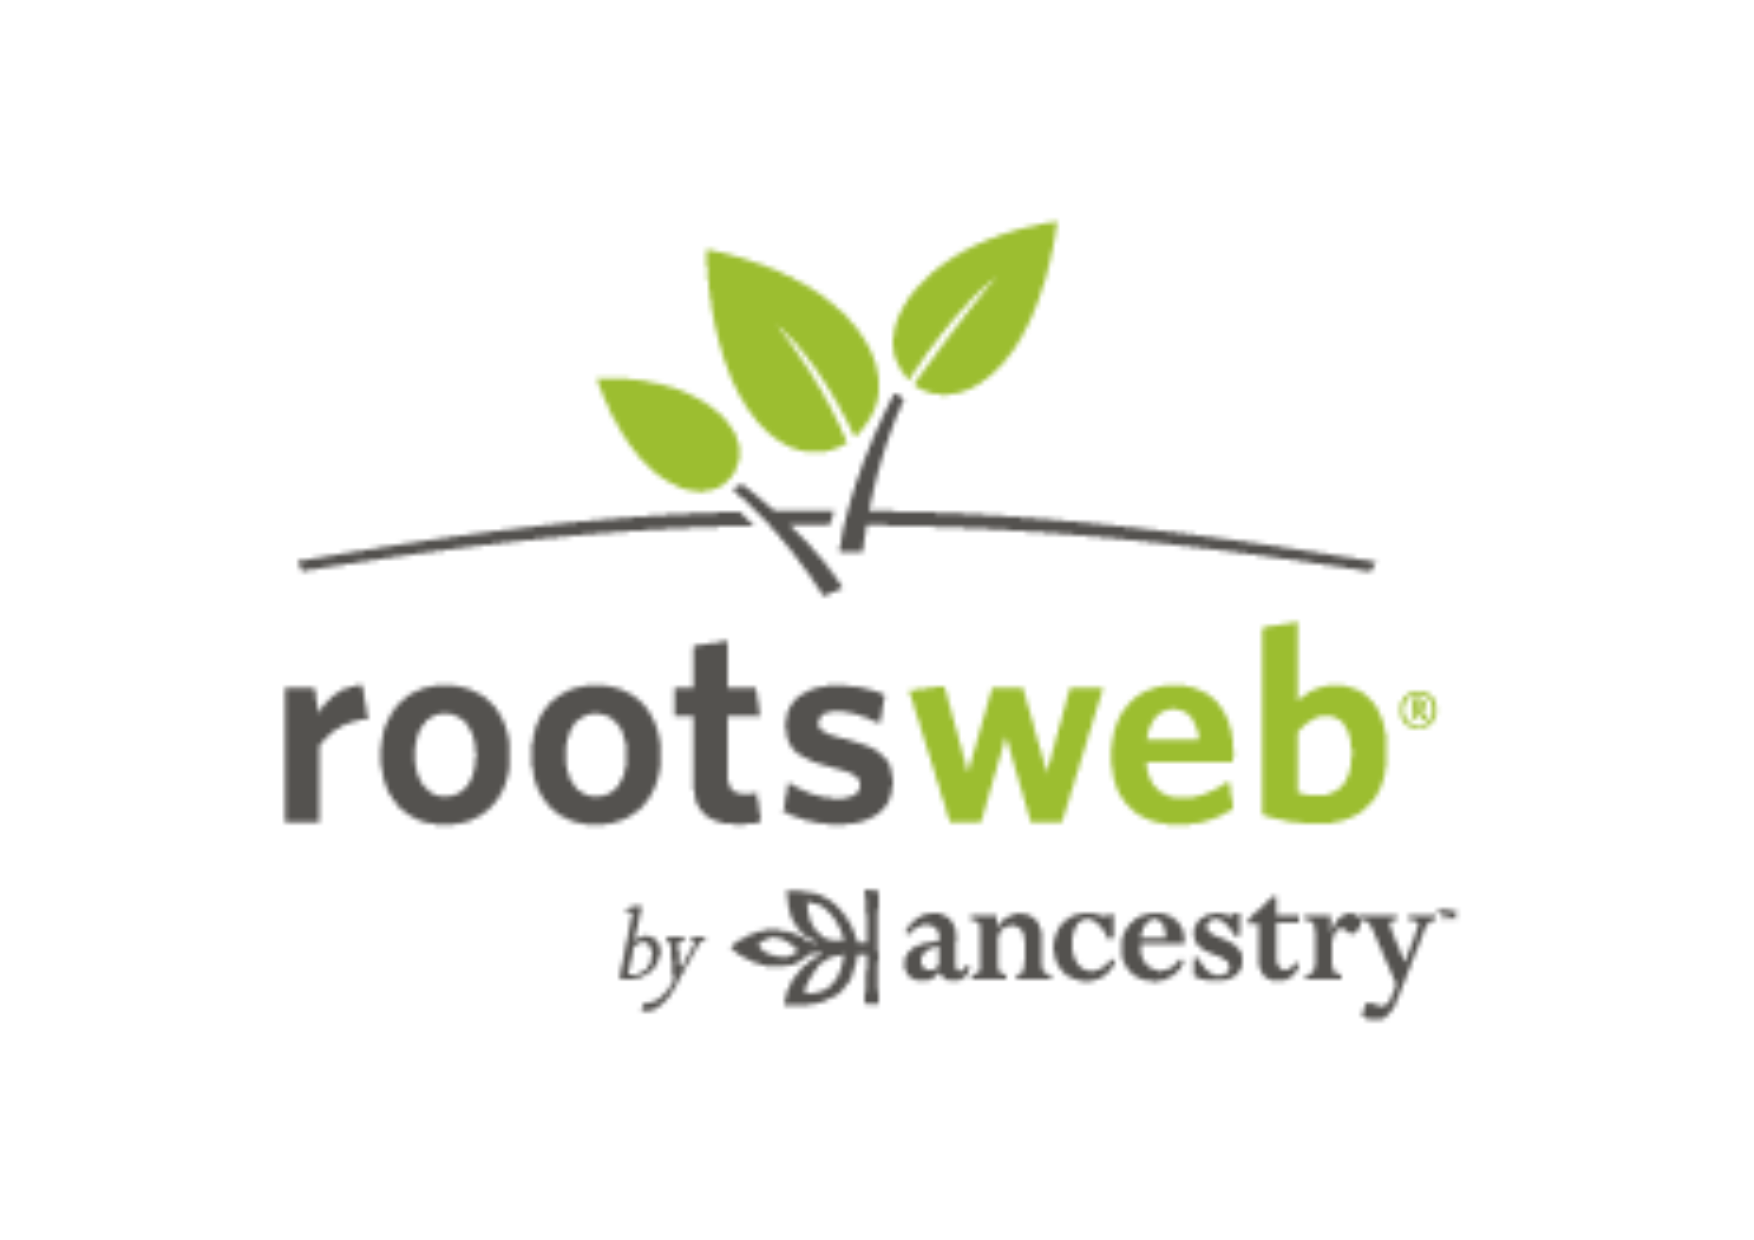 Rootsweb by ancestry